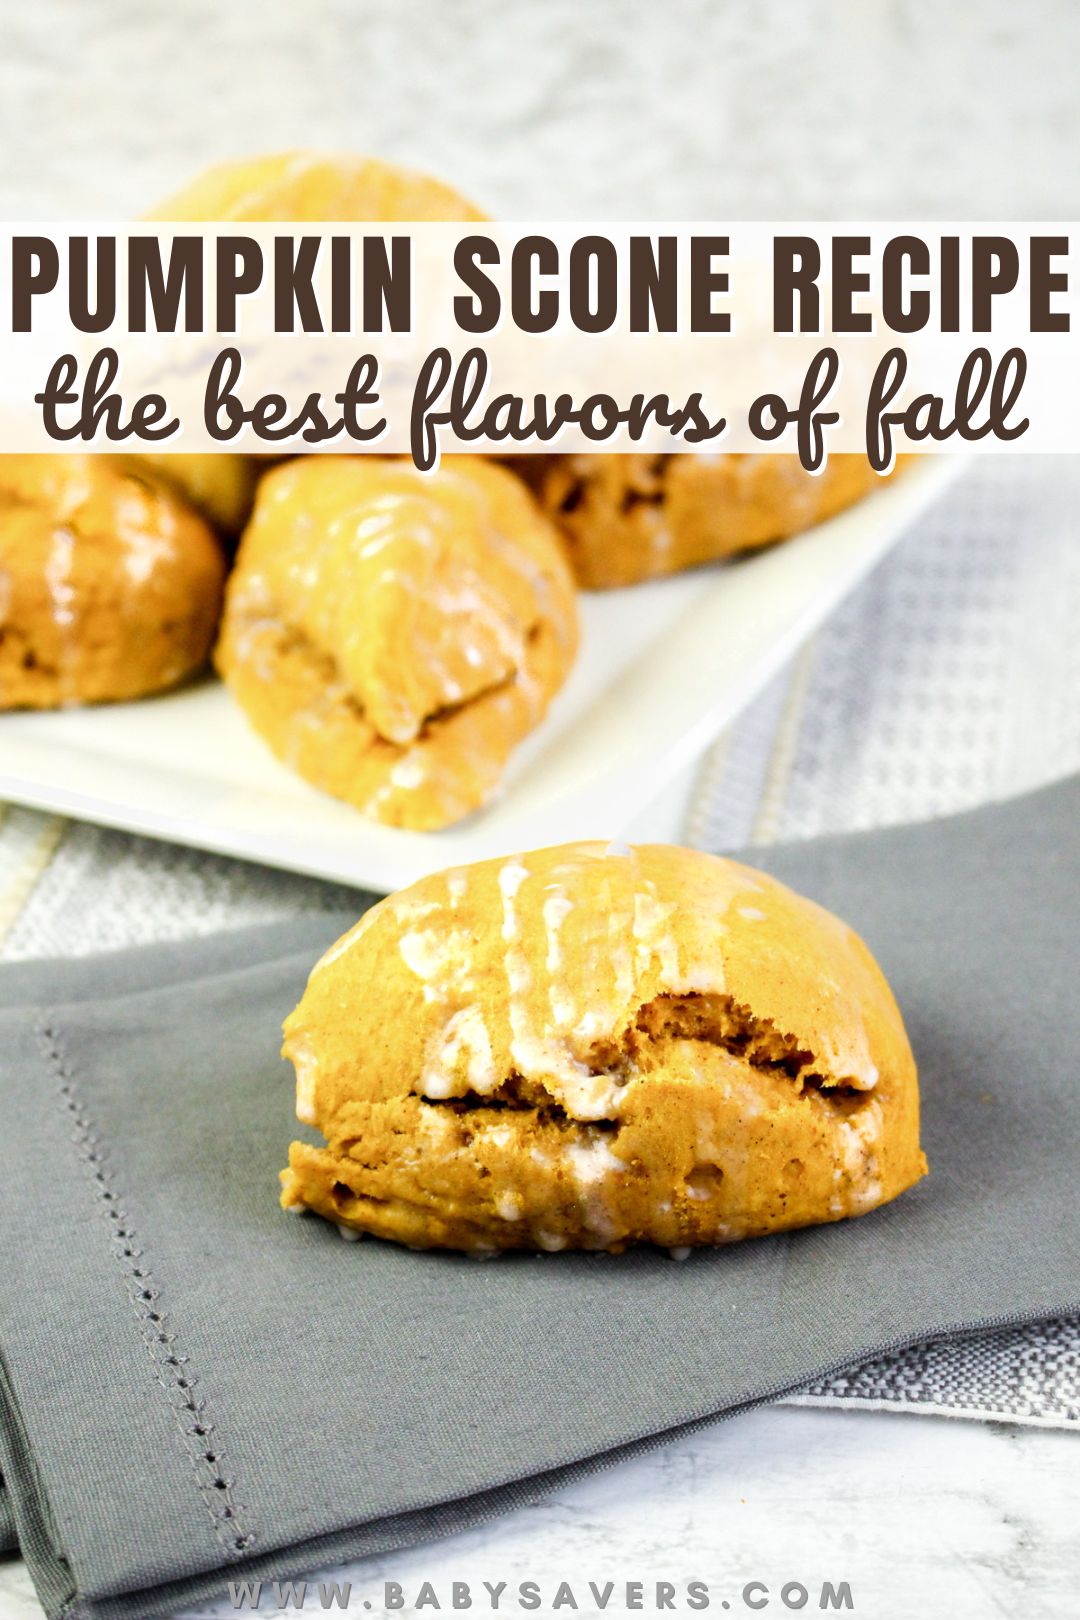 pumpkin scone recipe with text overlay reading pumpkin scone recipe, the best flavors of fall